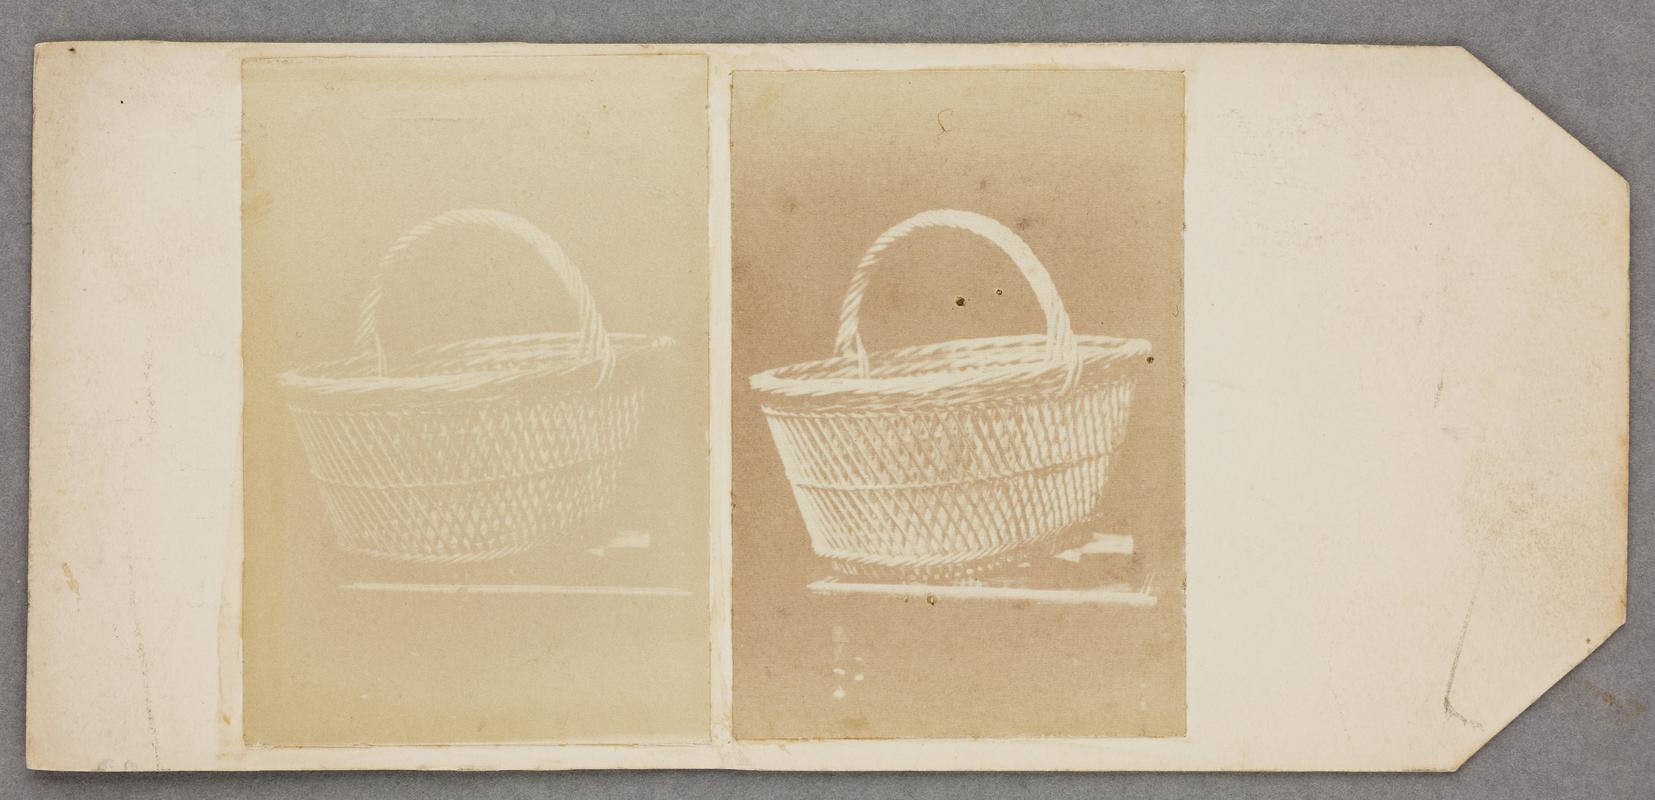 large basket on table, photograph